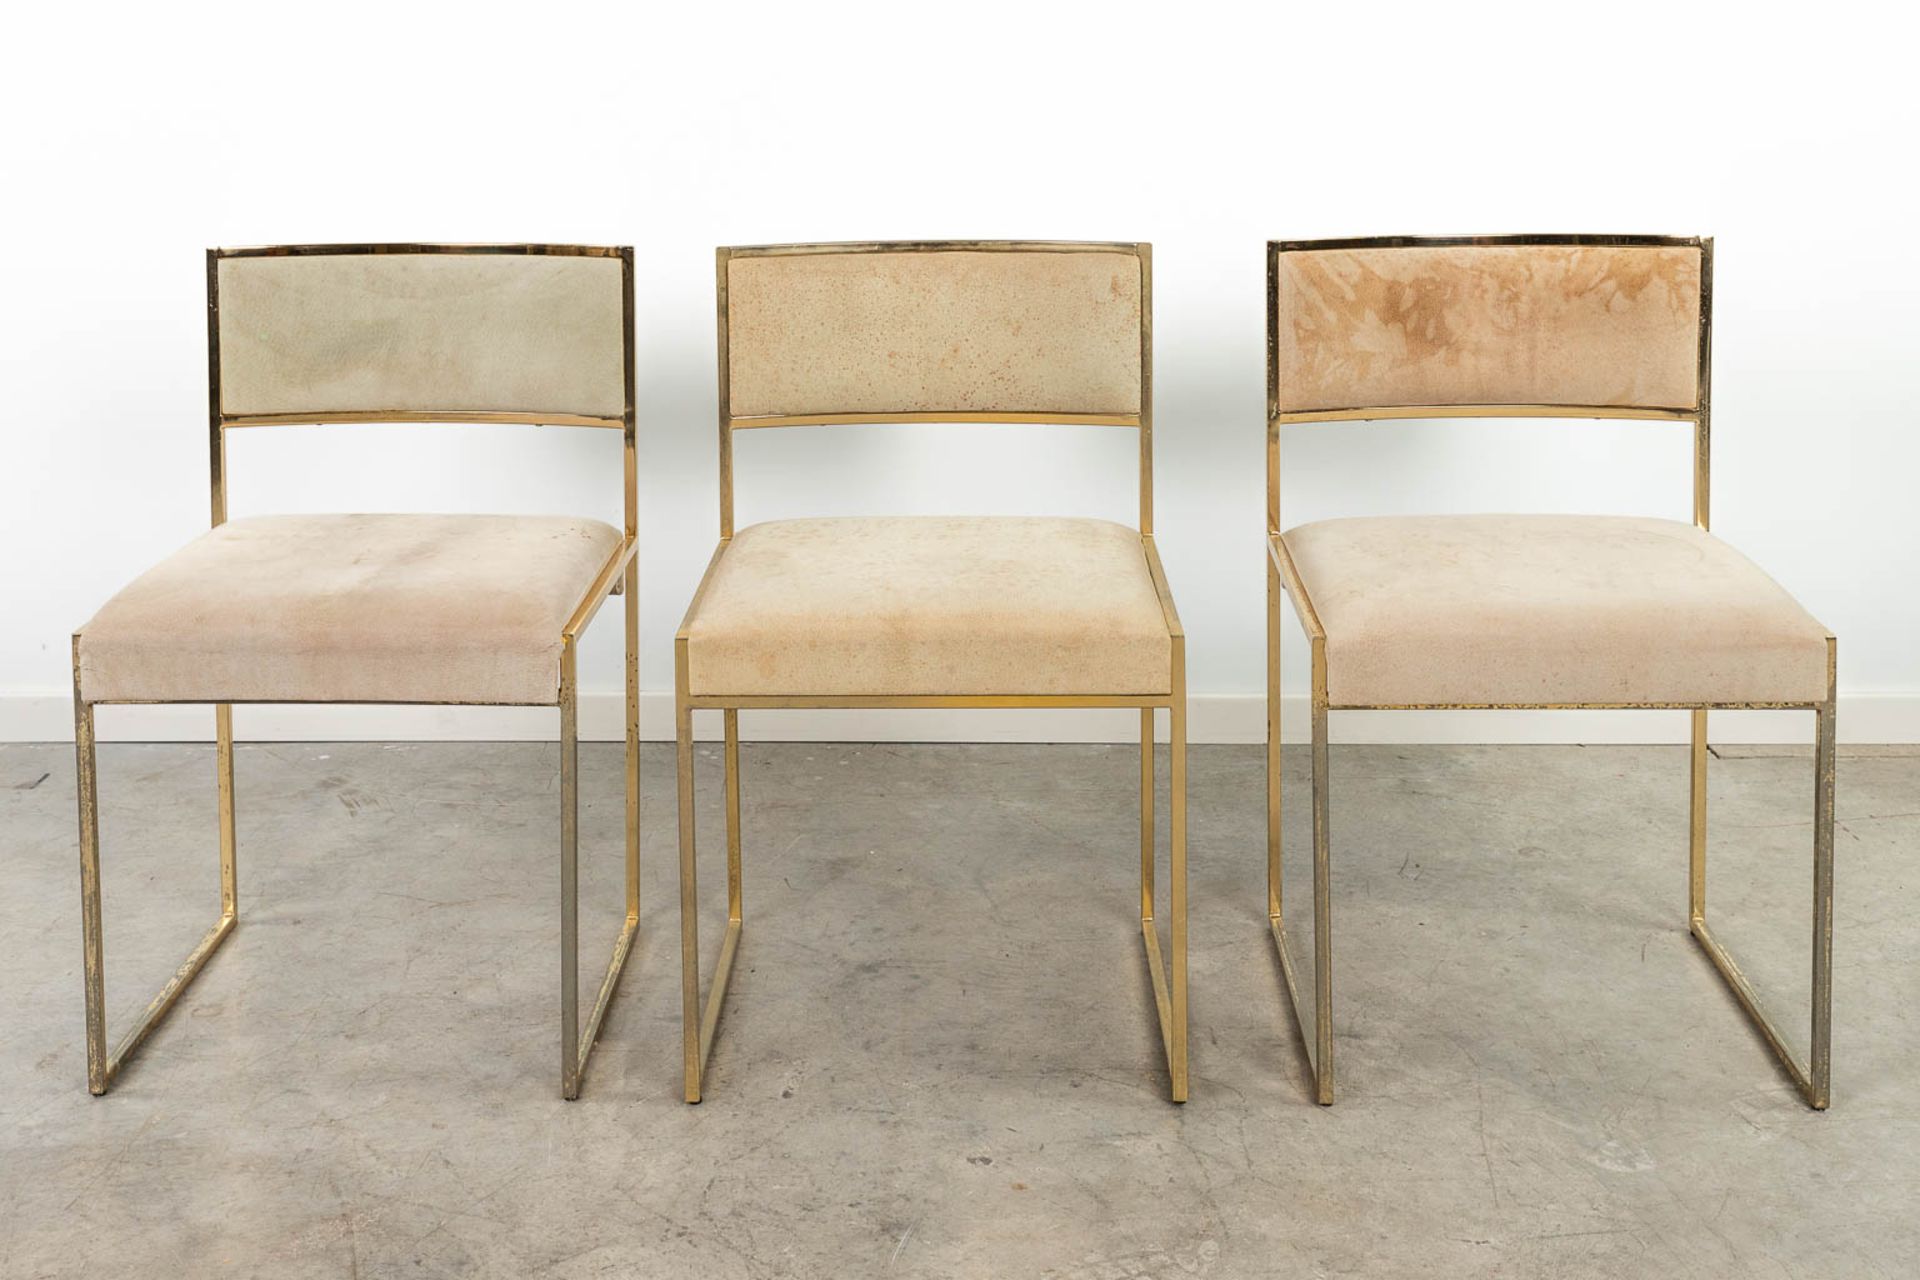 Willy RIZZO (1928-2013)ÊSet of 3 chairs, made of gold plated brass. Circa 1970. (49 x 48 x 78cm) - Image 8 of 14